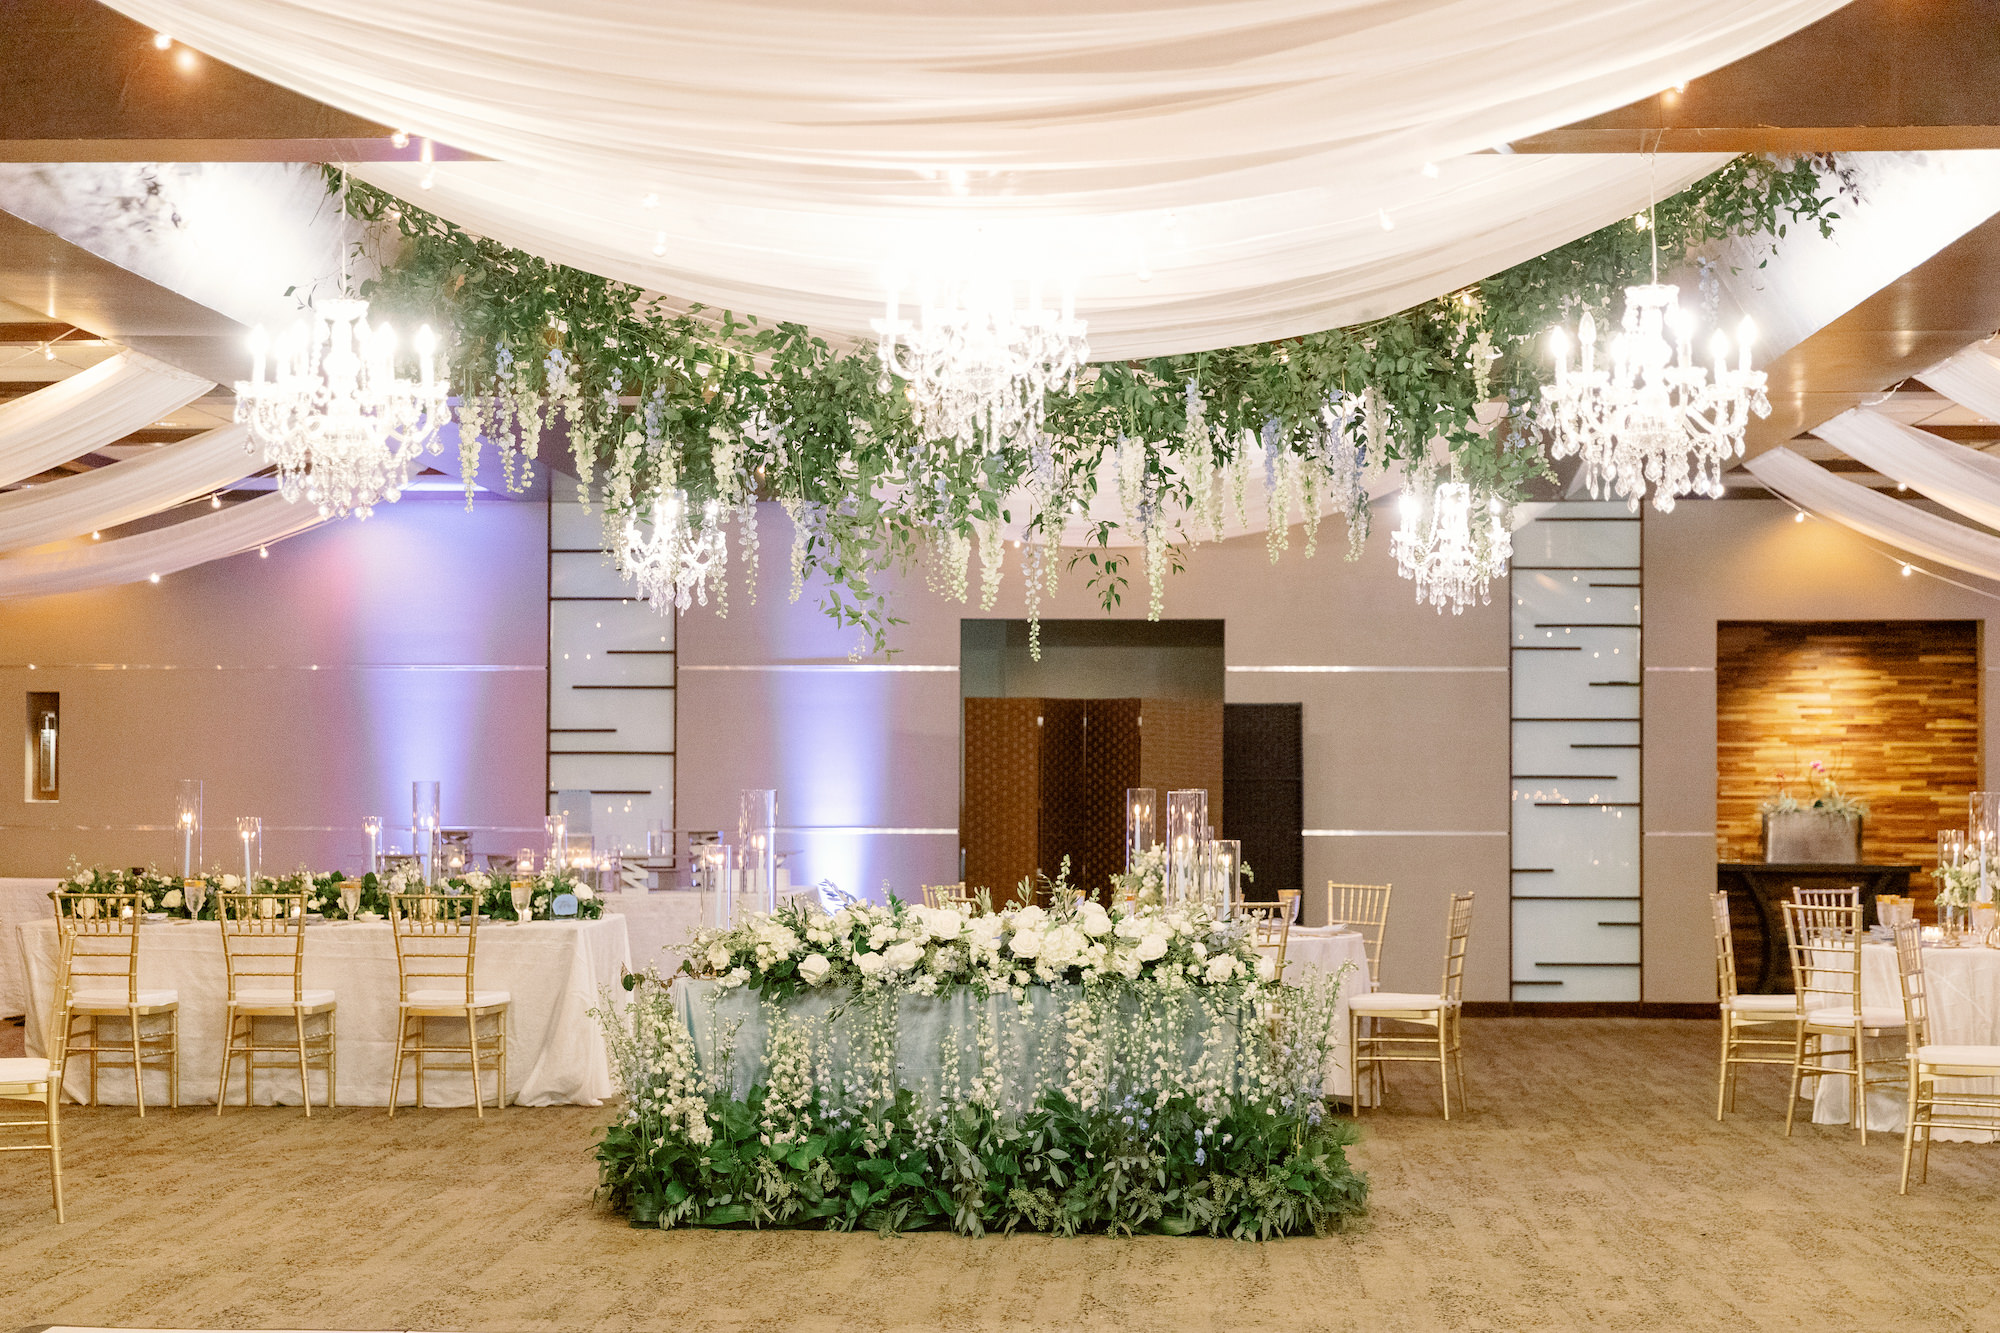 Reception Decor Ideas | Romantic Indoor White and Gold Spring Wedding Reception with Gold Chiavari Chairs and White Ceiling Drapery with Hanging Floral Arrangements and Garden Inspired Sweetheart Table | Sarasota Wedding Planner MDP Events | Florist Botanica International Design Studio | Venue Marie Selby Gardens